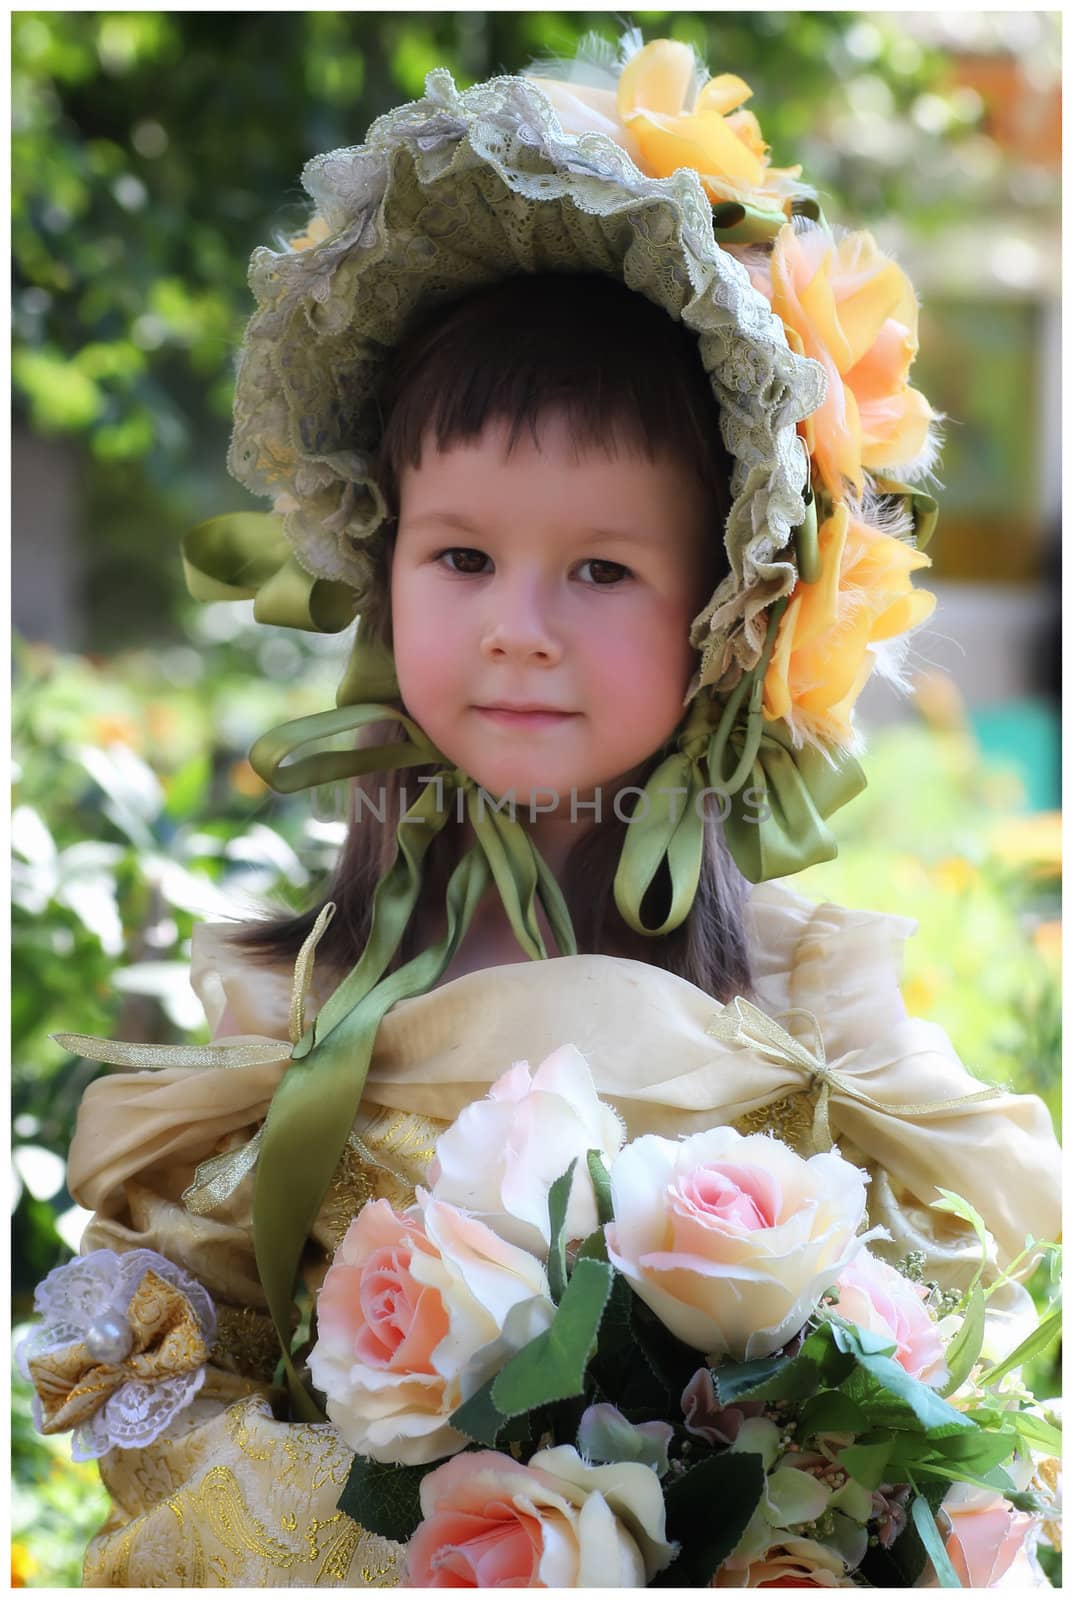 Color portrait of little girl in retro style in dress and hat with flowers